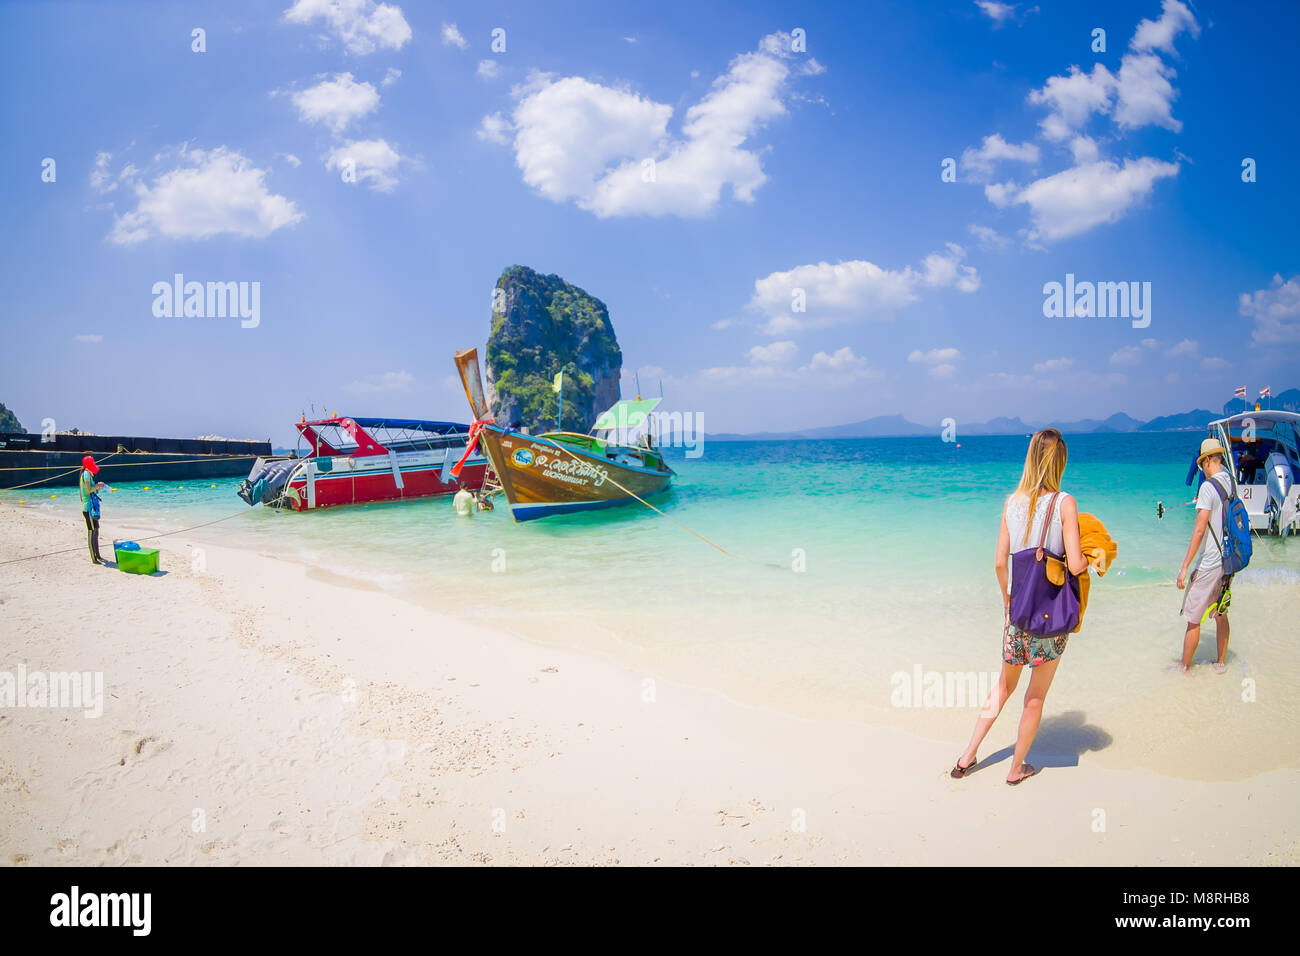 PODA, THAILAND - FEBRUARY 09, 2018: Beautiful outdoor view of unidentified people in a white sand close to long tail boat on Phra nang island in a gorgeous sunny day and turquoise water Stock Photo